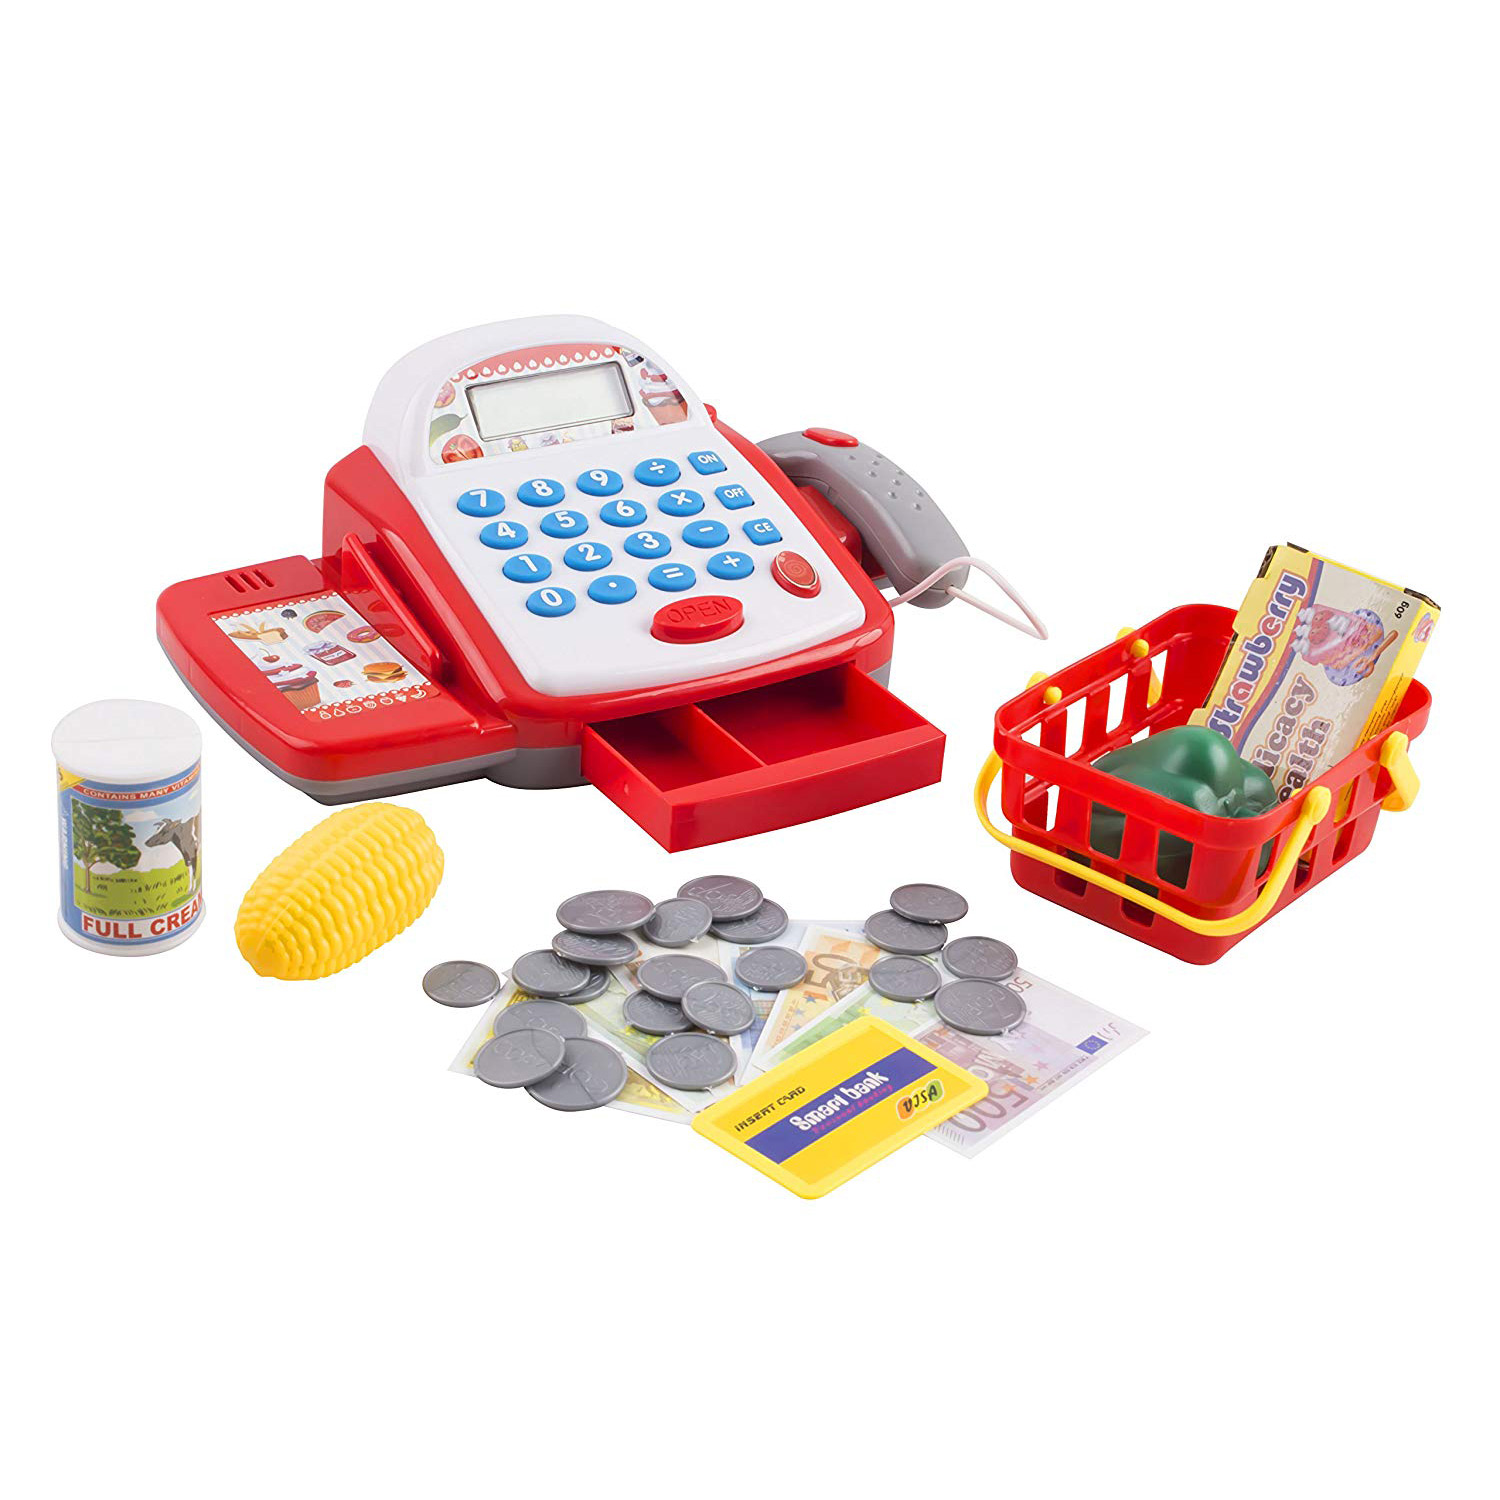 Grocery Store & Trolley w/ Working Scanner O.B Toys&Gift Deluxe Supermarket Toy Play Set for Kids Cash Register & Shopping Cart Kids Pretend Play Grocery 